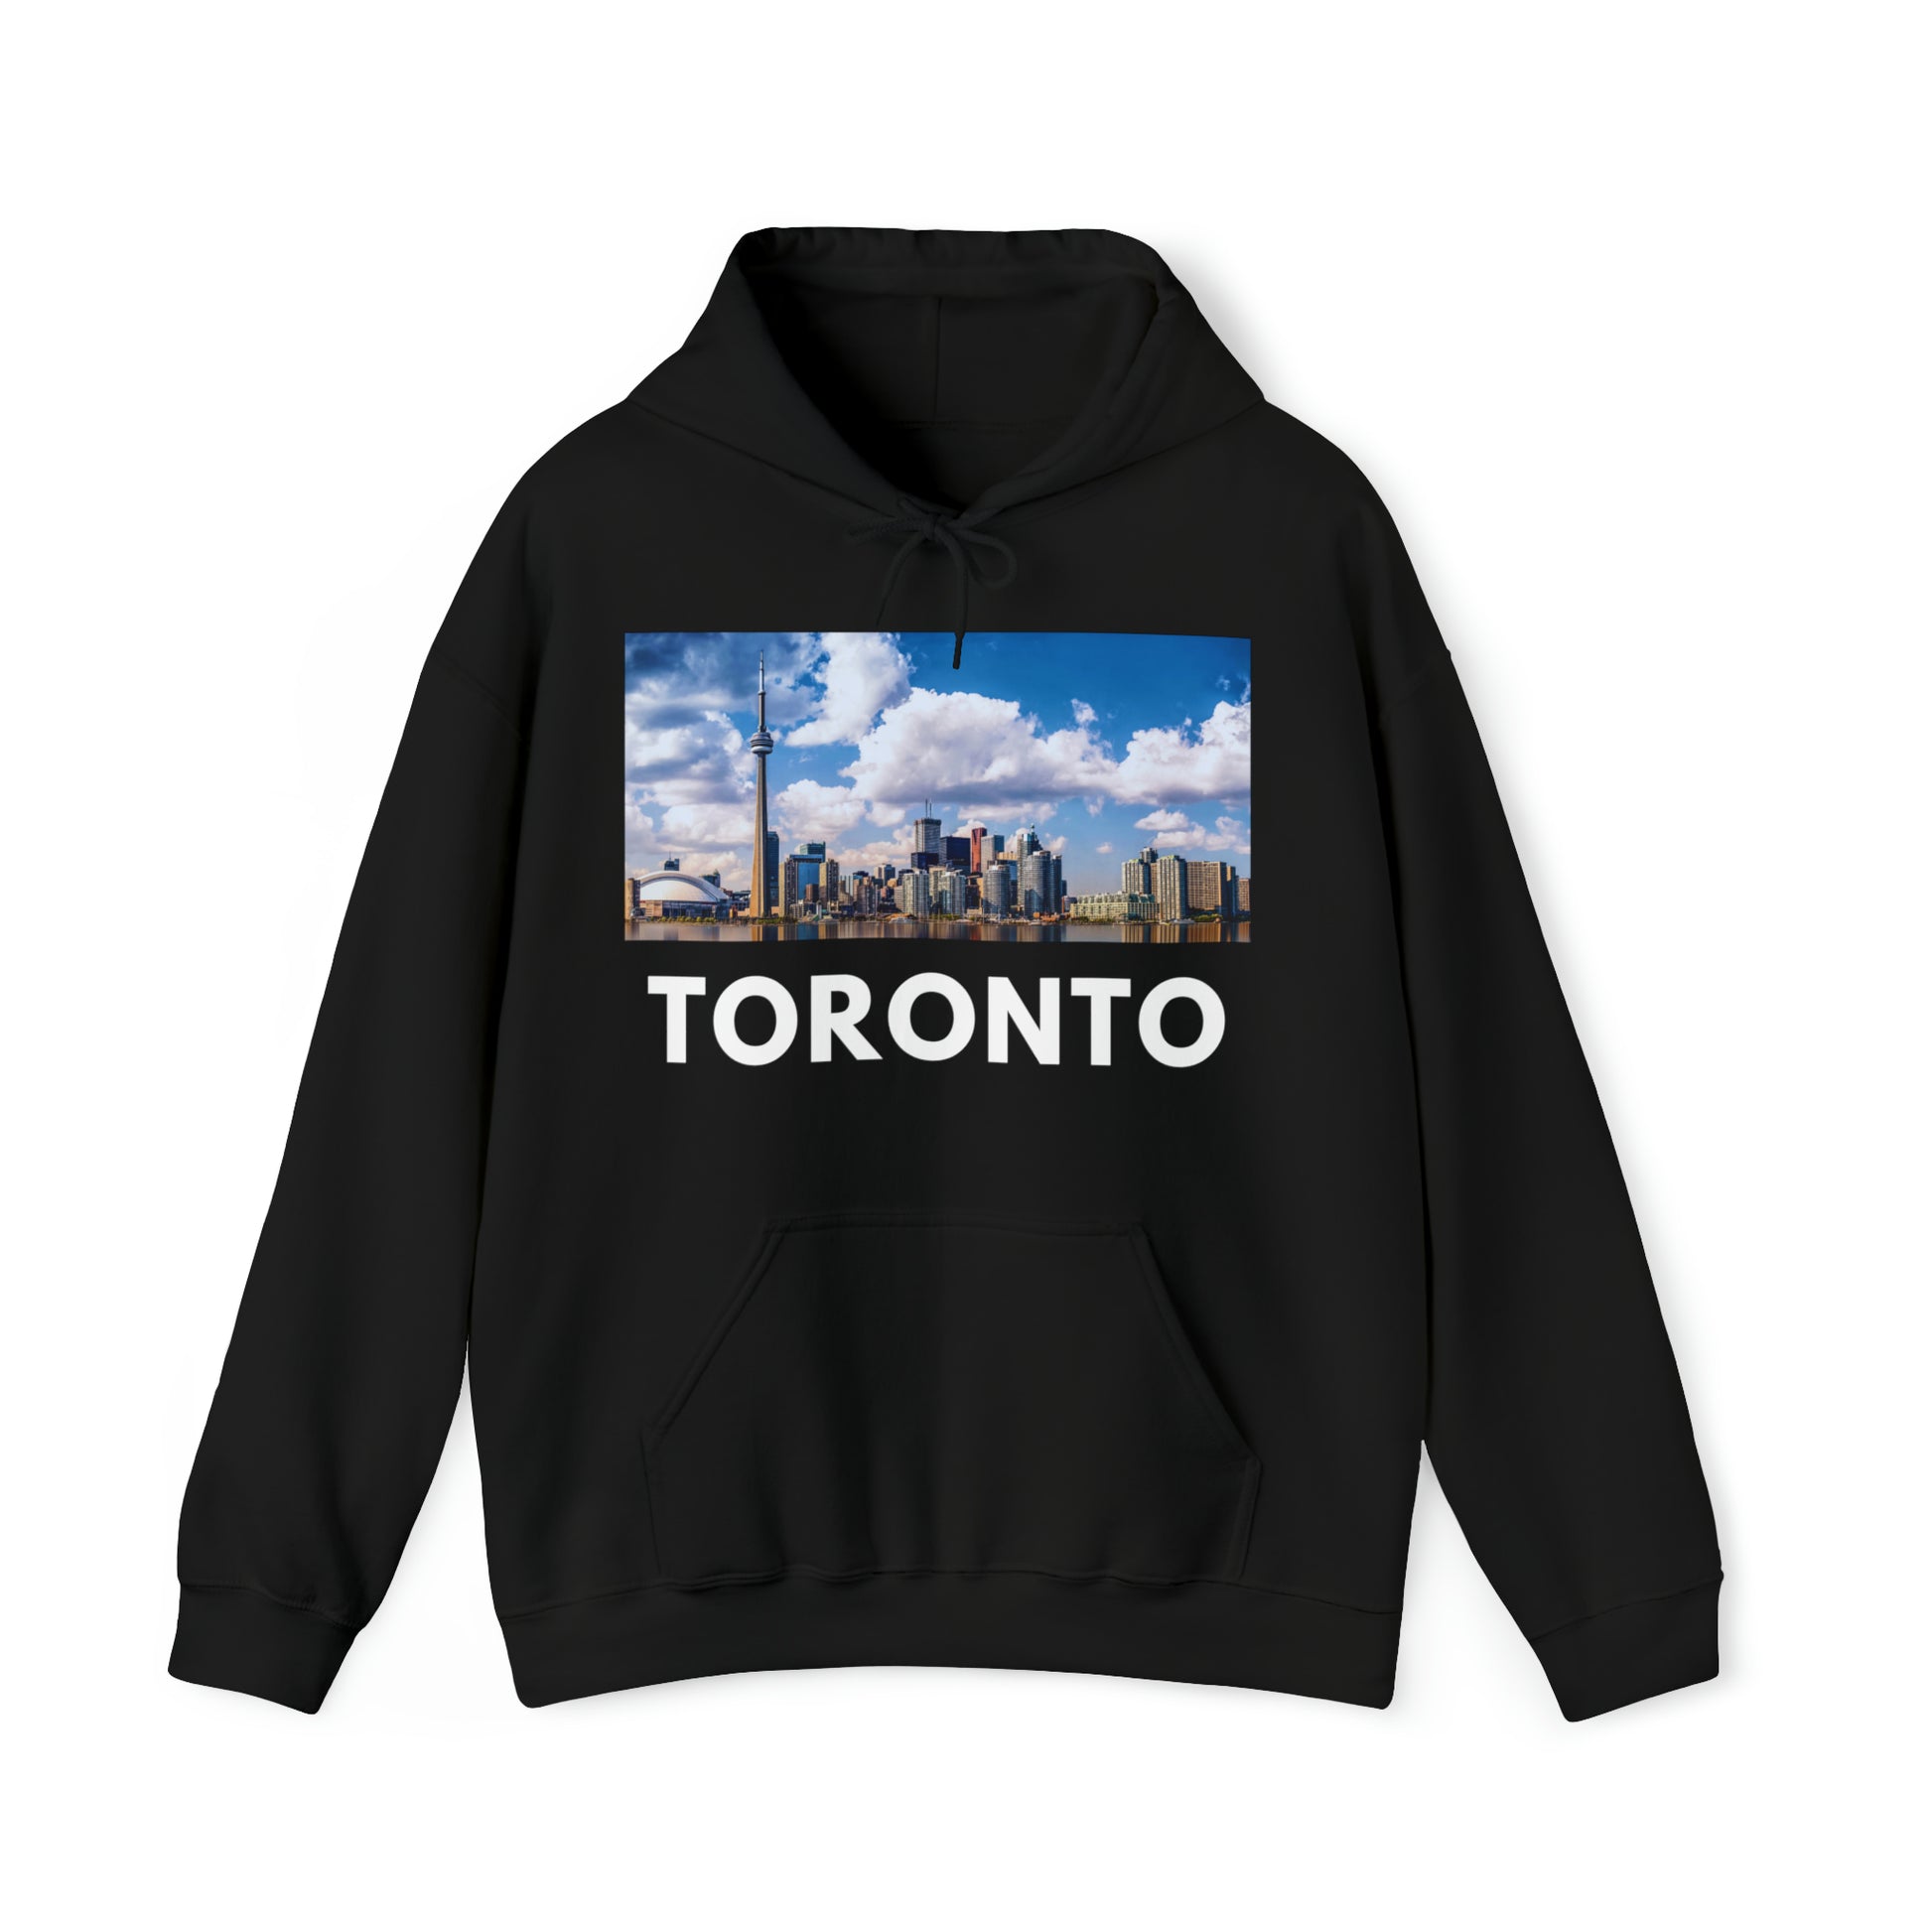 XL Black Toronto Hoodie: CN Tower by Day from HoodySZN.com